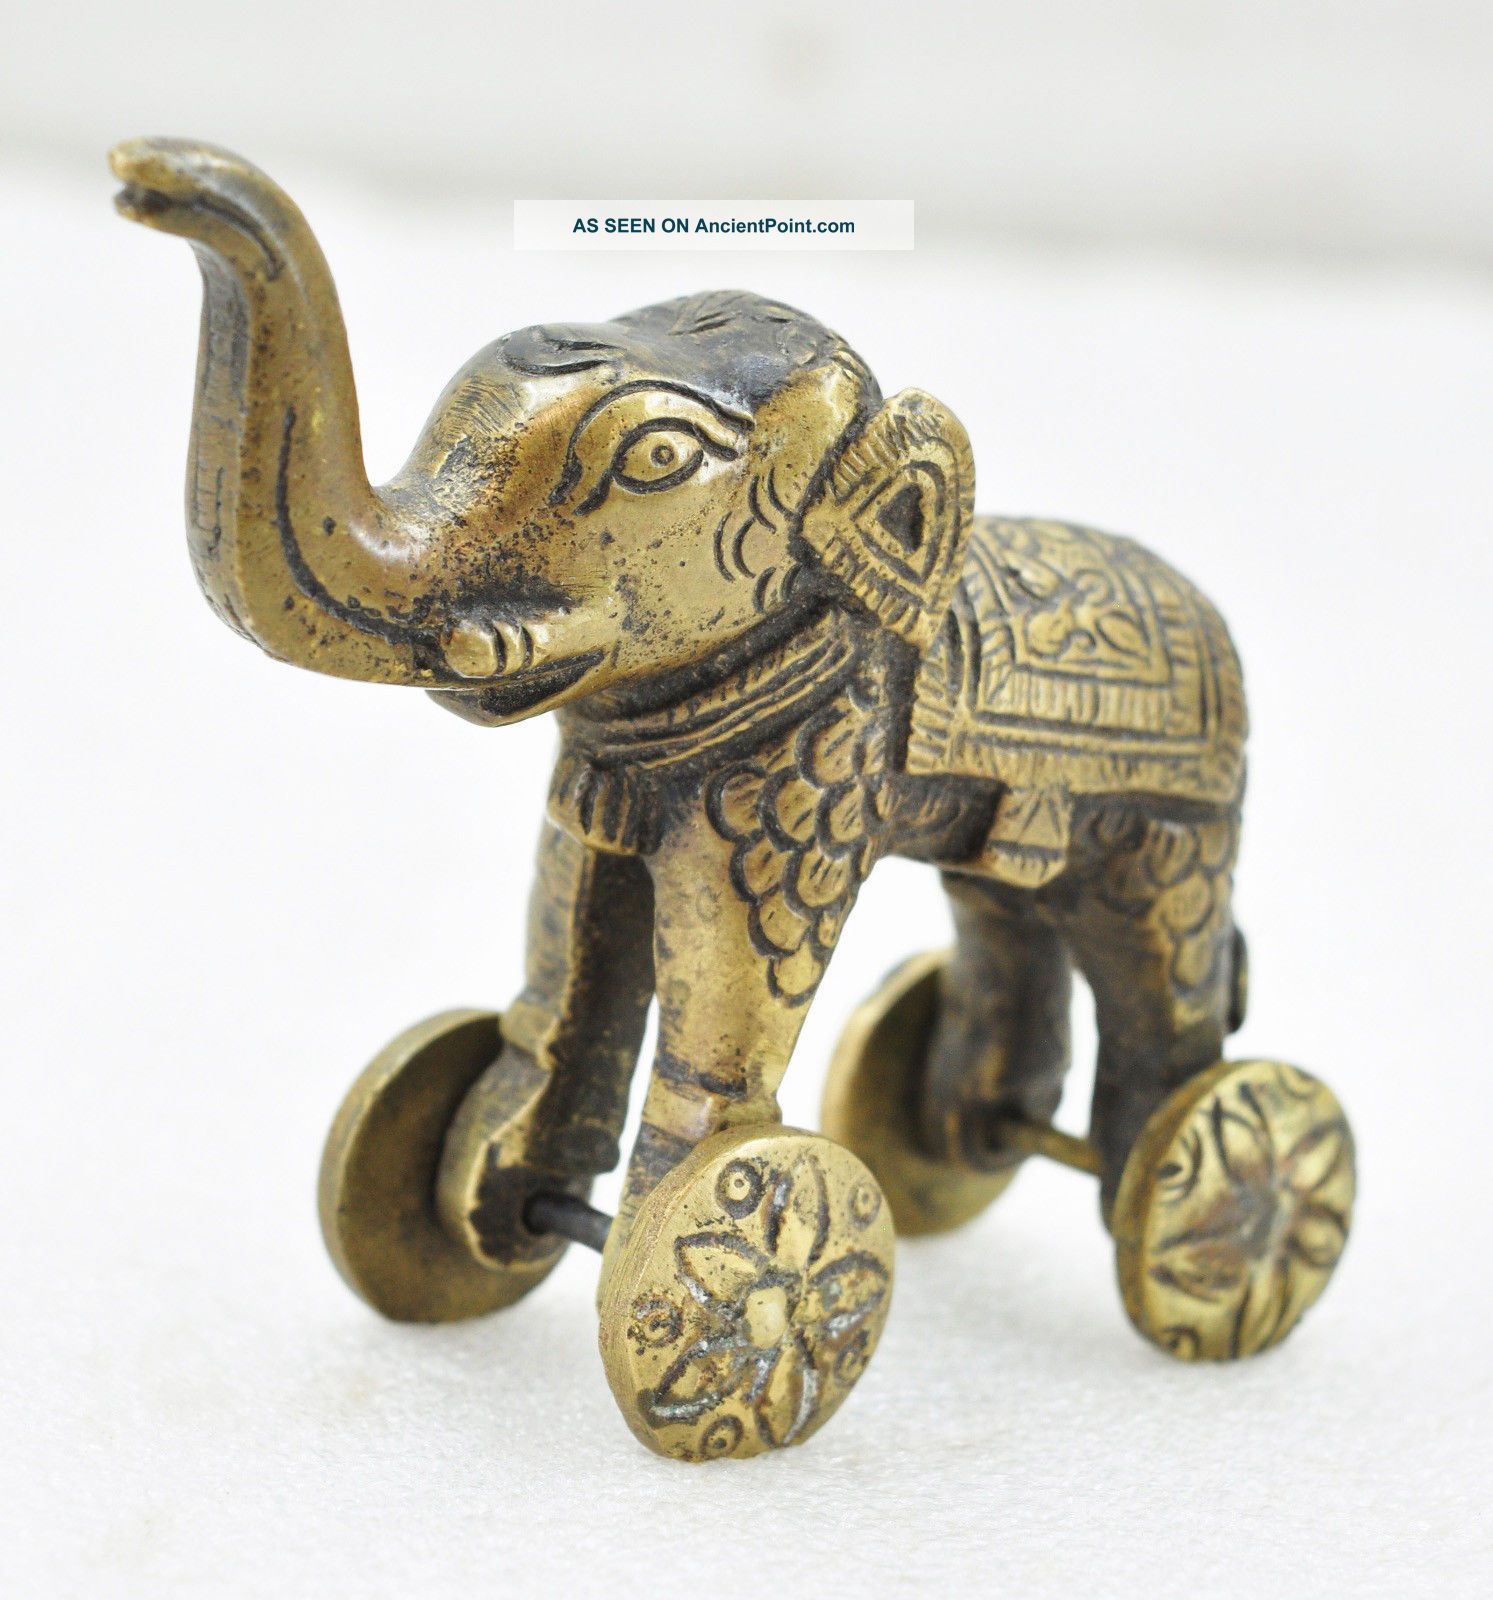 1900s Indian Antique Hand Crafted Engraved Brass Elephant On Wheels Figurine India photo